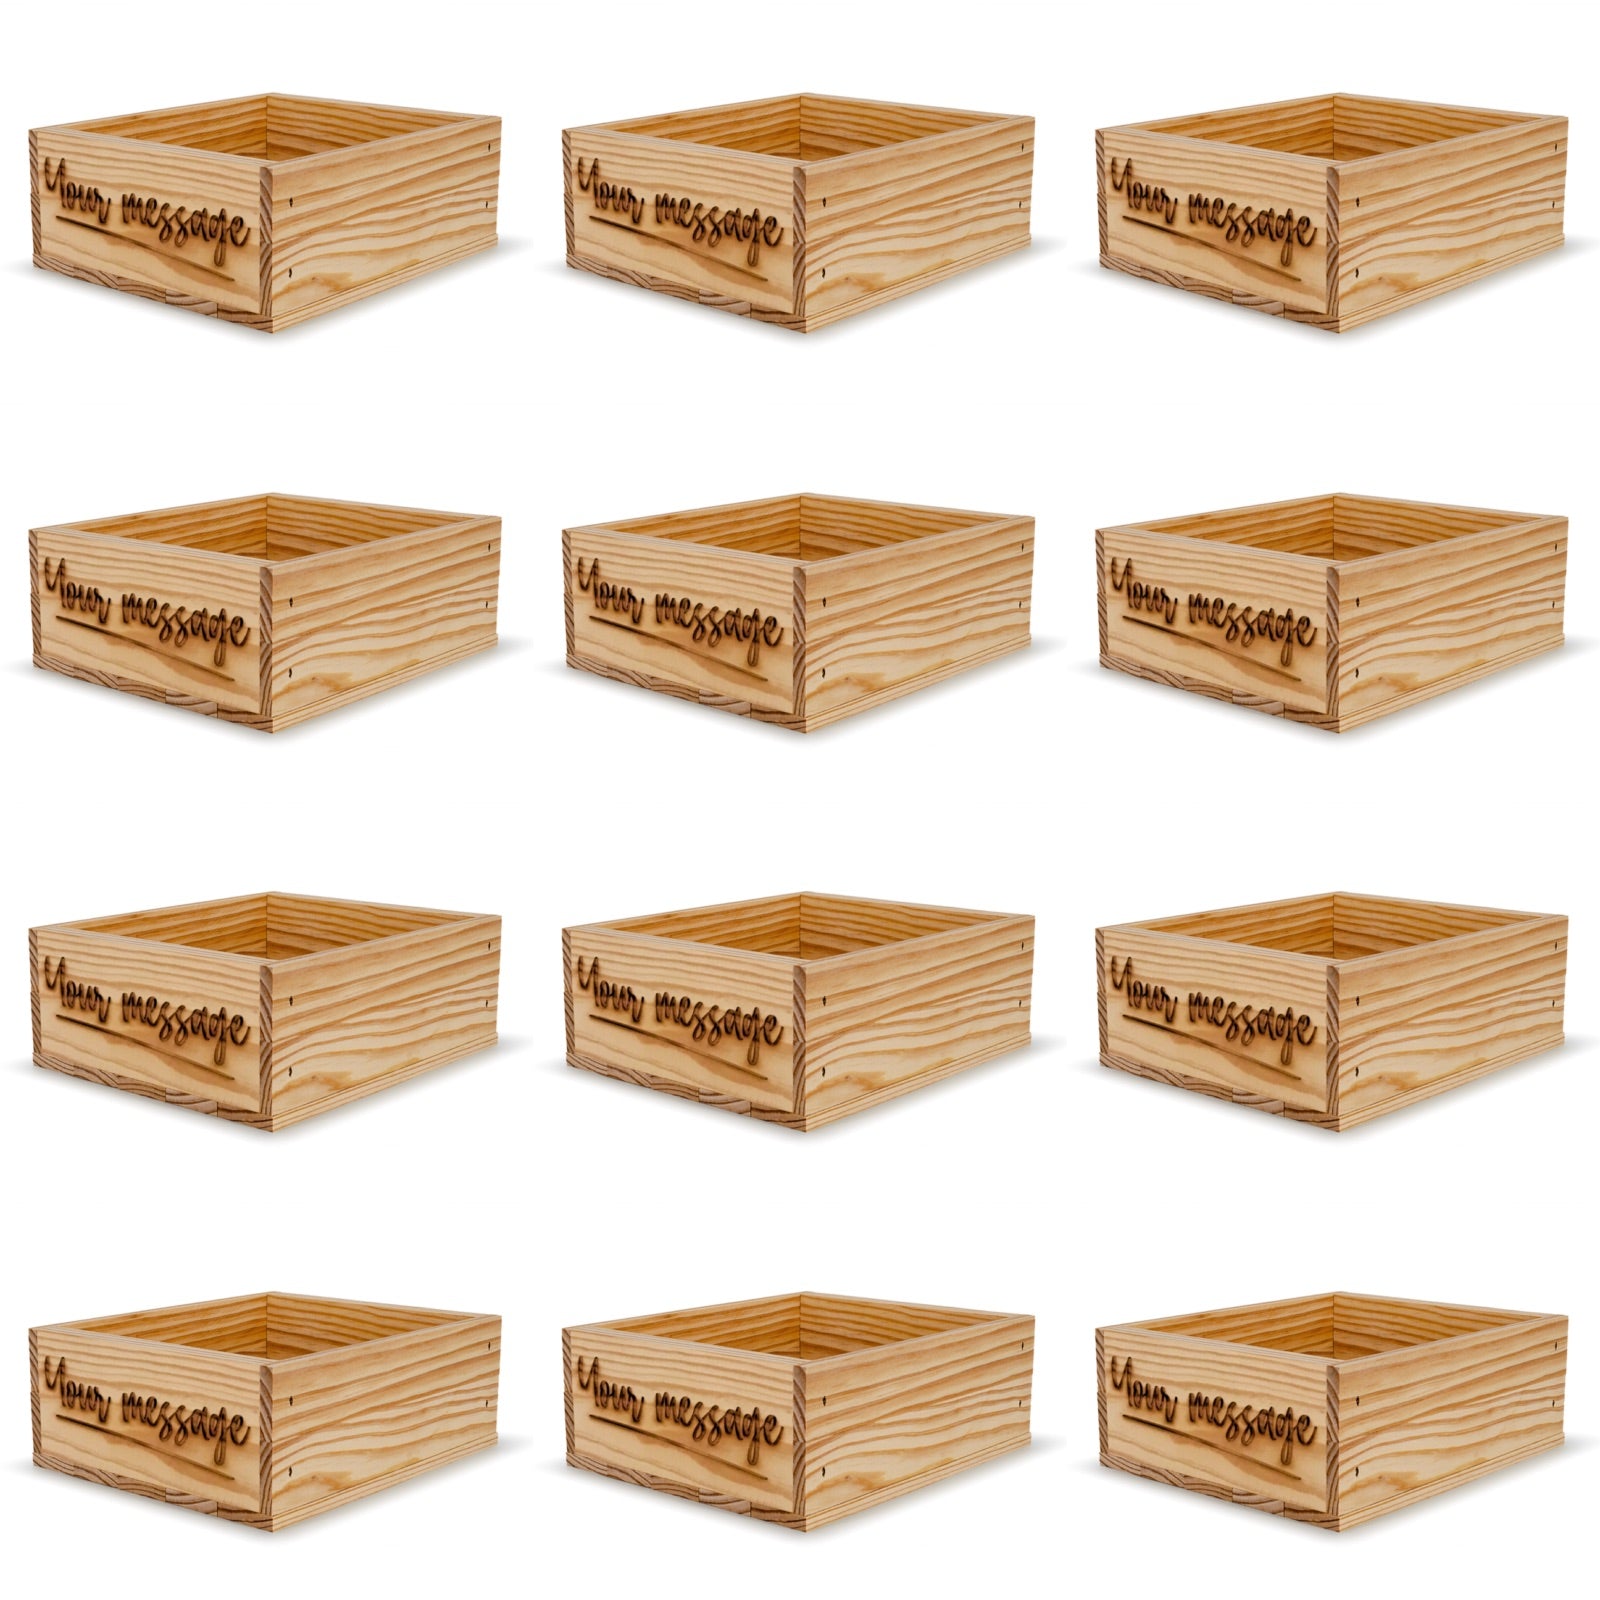 12 Small wooden crates with custom message 9x8x3.5